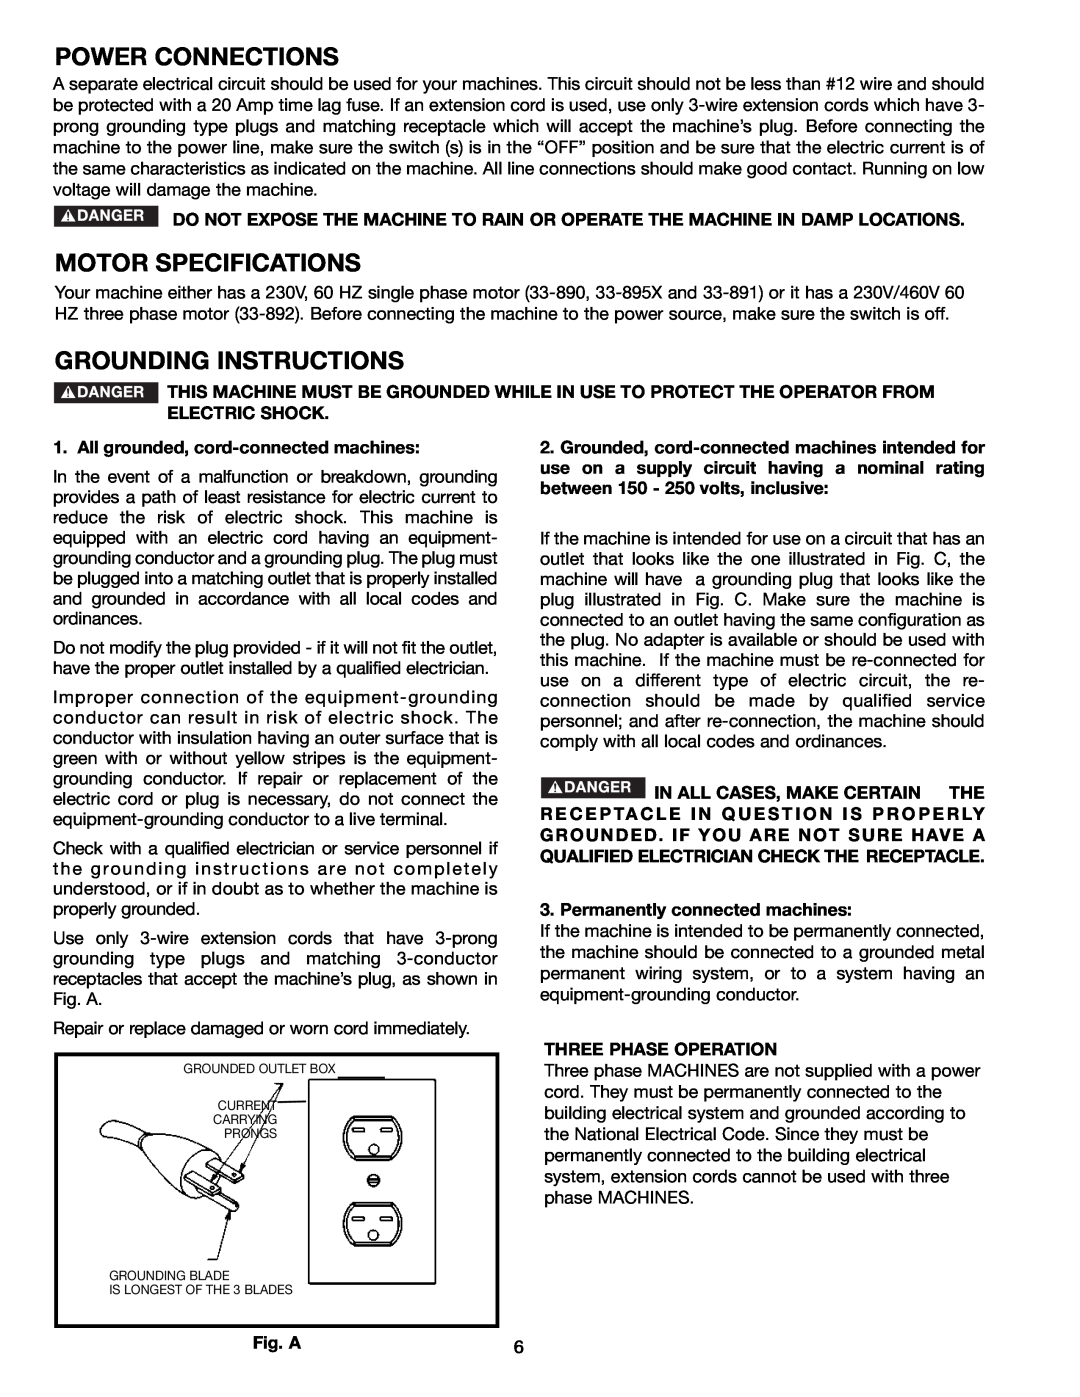 Porter-Cable 33-891 Power Connections, Motor Specifications, Grounding Instructions, All grounded, cord-connected machines 